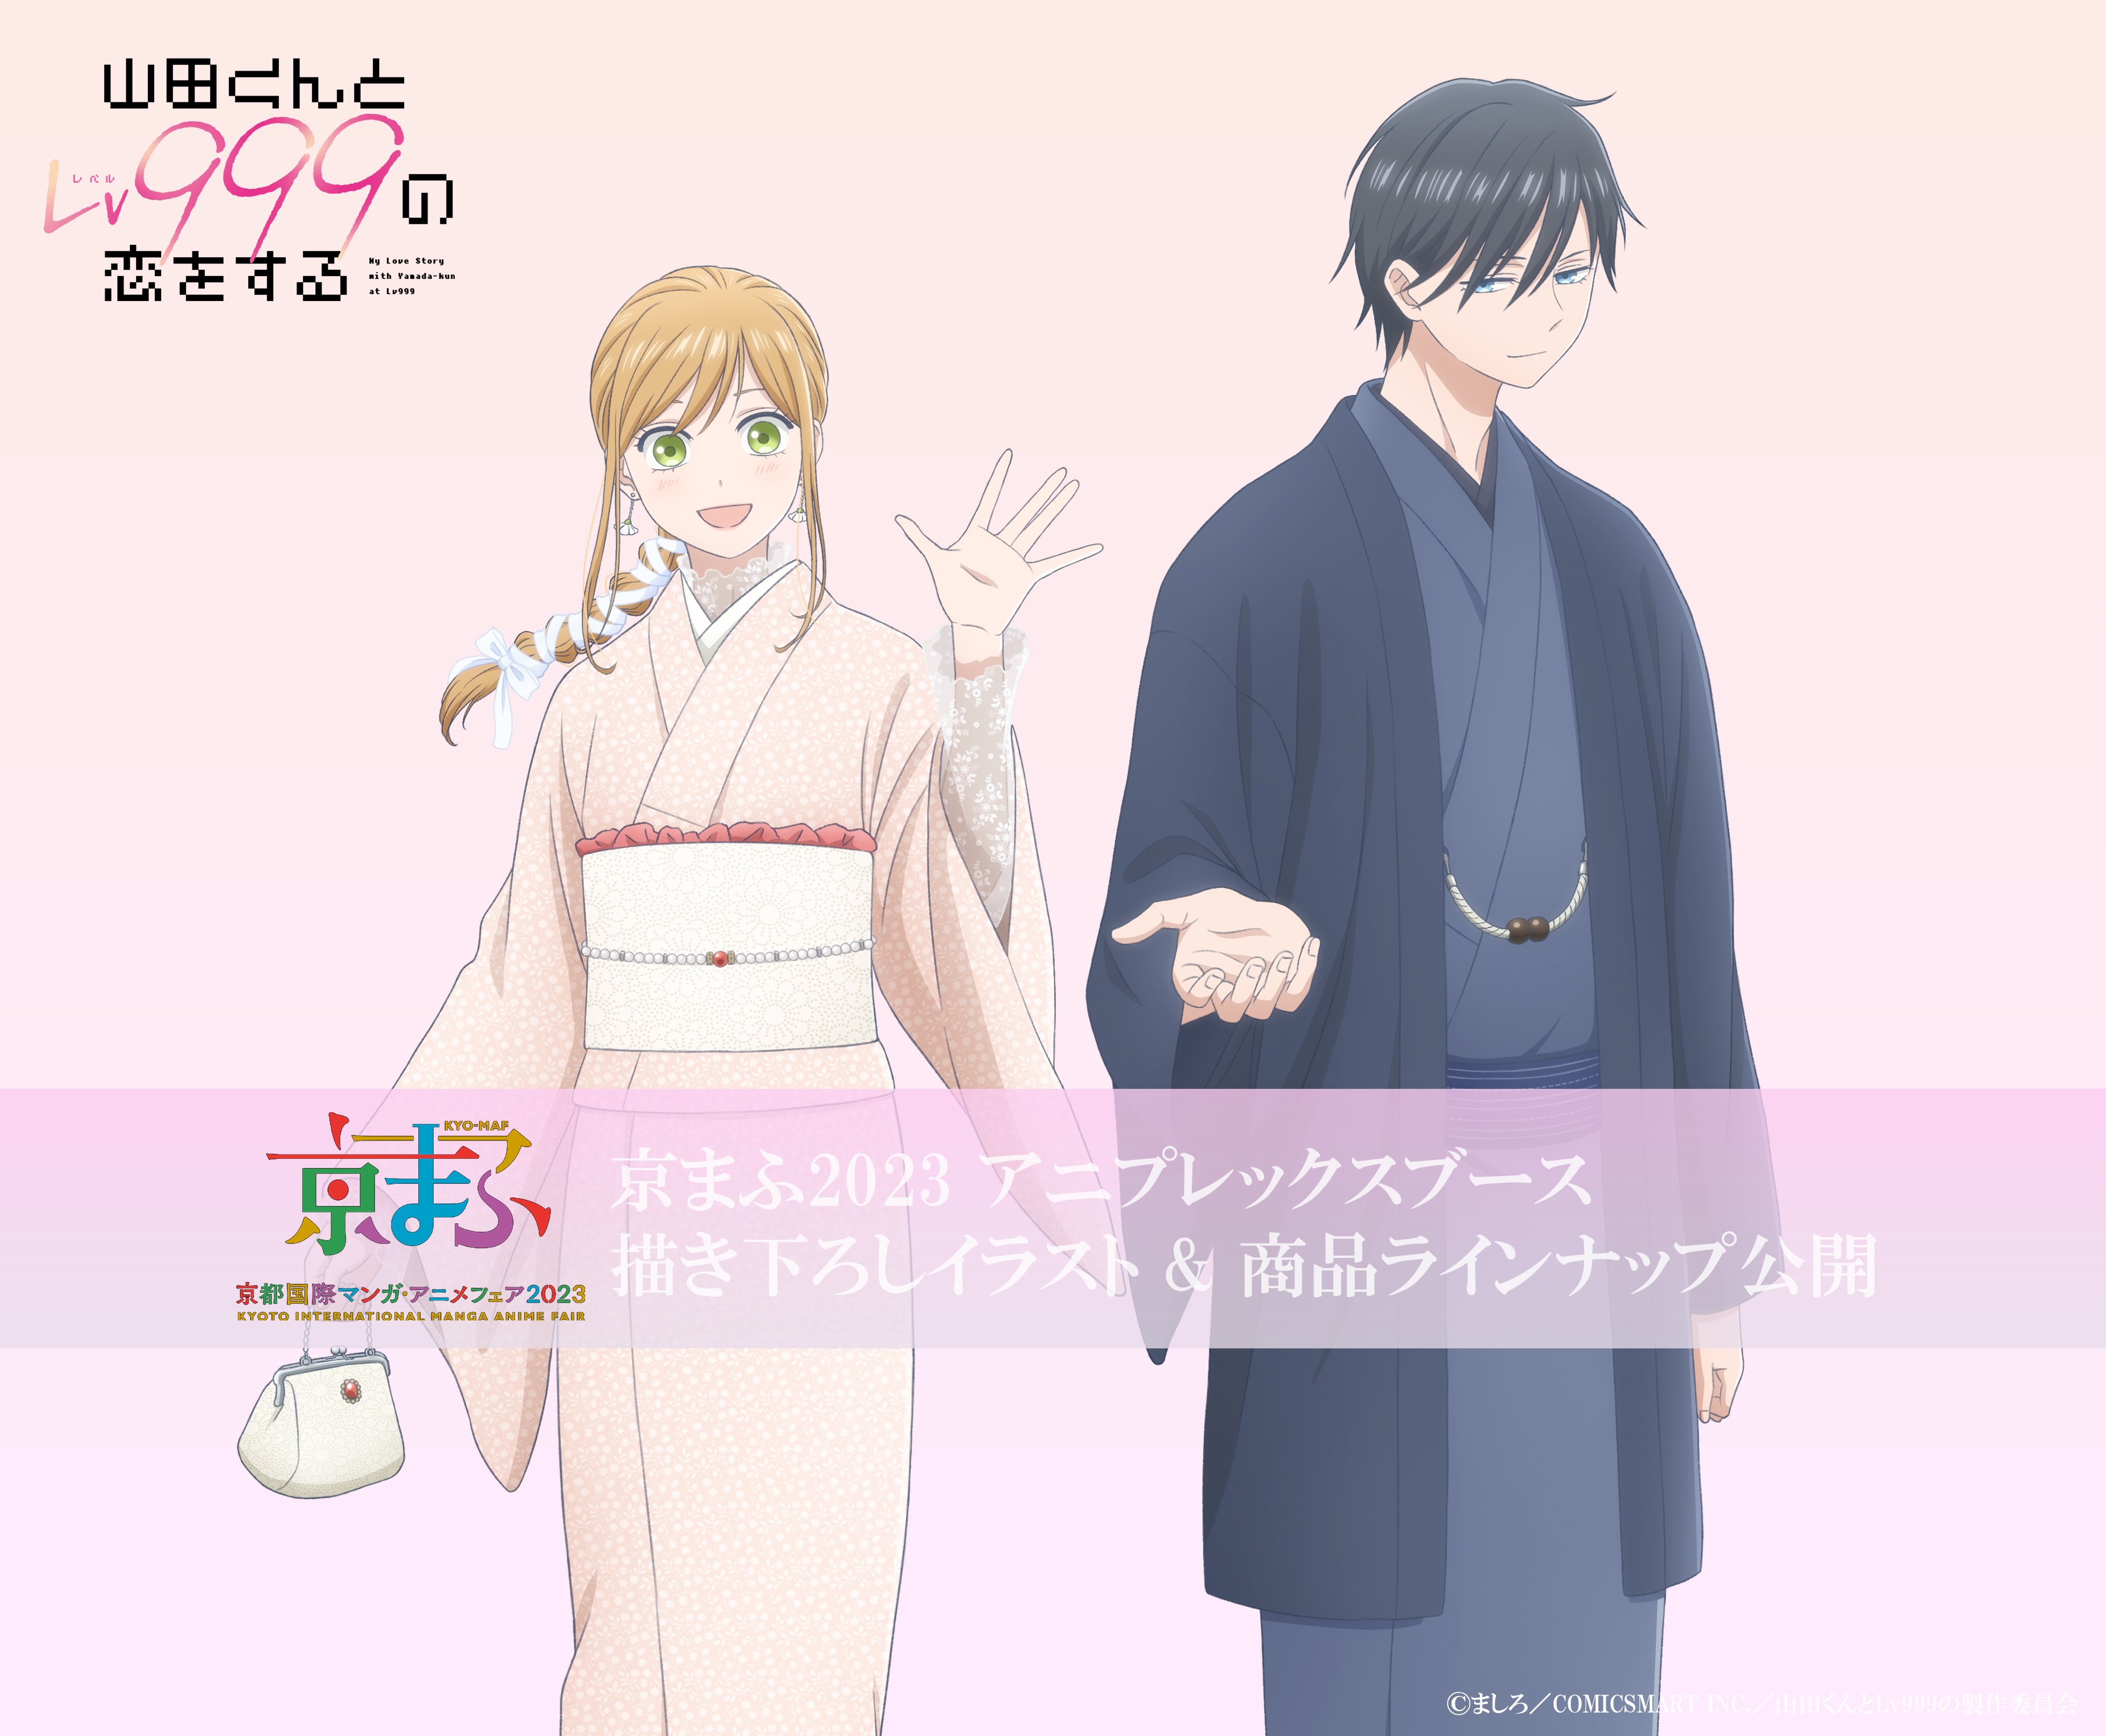 Shoujo Crave on X: Yamada-kun to Lv999 (My Love Story) new visual was  released! 🌸  / X